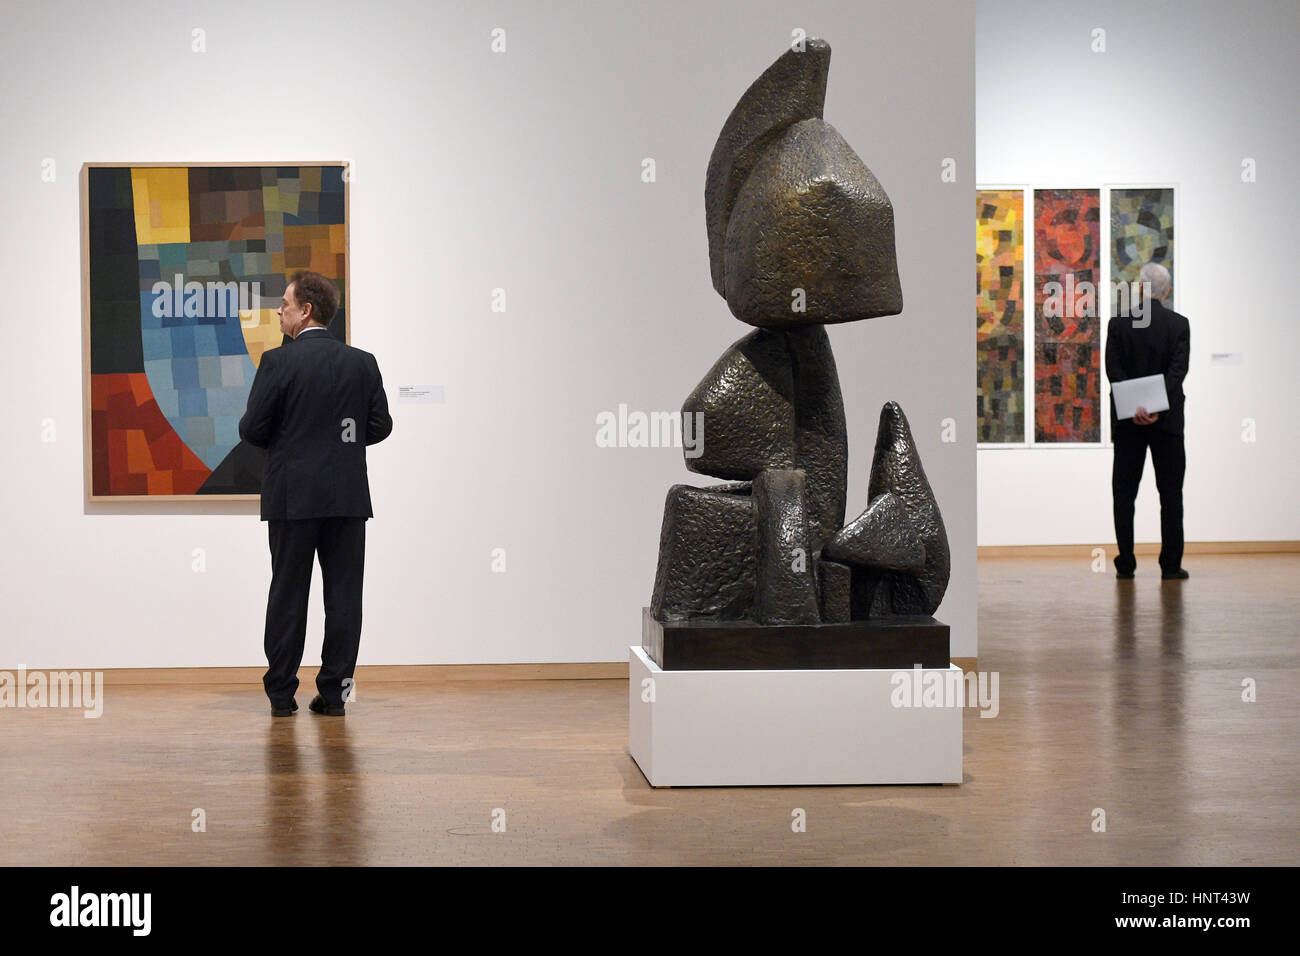 Cologne, Germany. 16th Feb, 2017. L-R: The painting 'Composition' (1930), the bronze sculpture 'Ascent' (1929/1960) and the painting 'Homage to the Coloured Peoples' (1938) by Otto Freundlich on display as part of the Ludwig Museum's 'Otto Freundlich: Cosmic Communism' show in Cologne, Germany, 16 February 2017. Photo: Henning Kaiser/dpa/Alamy Live News Stock Photo